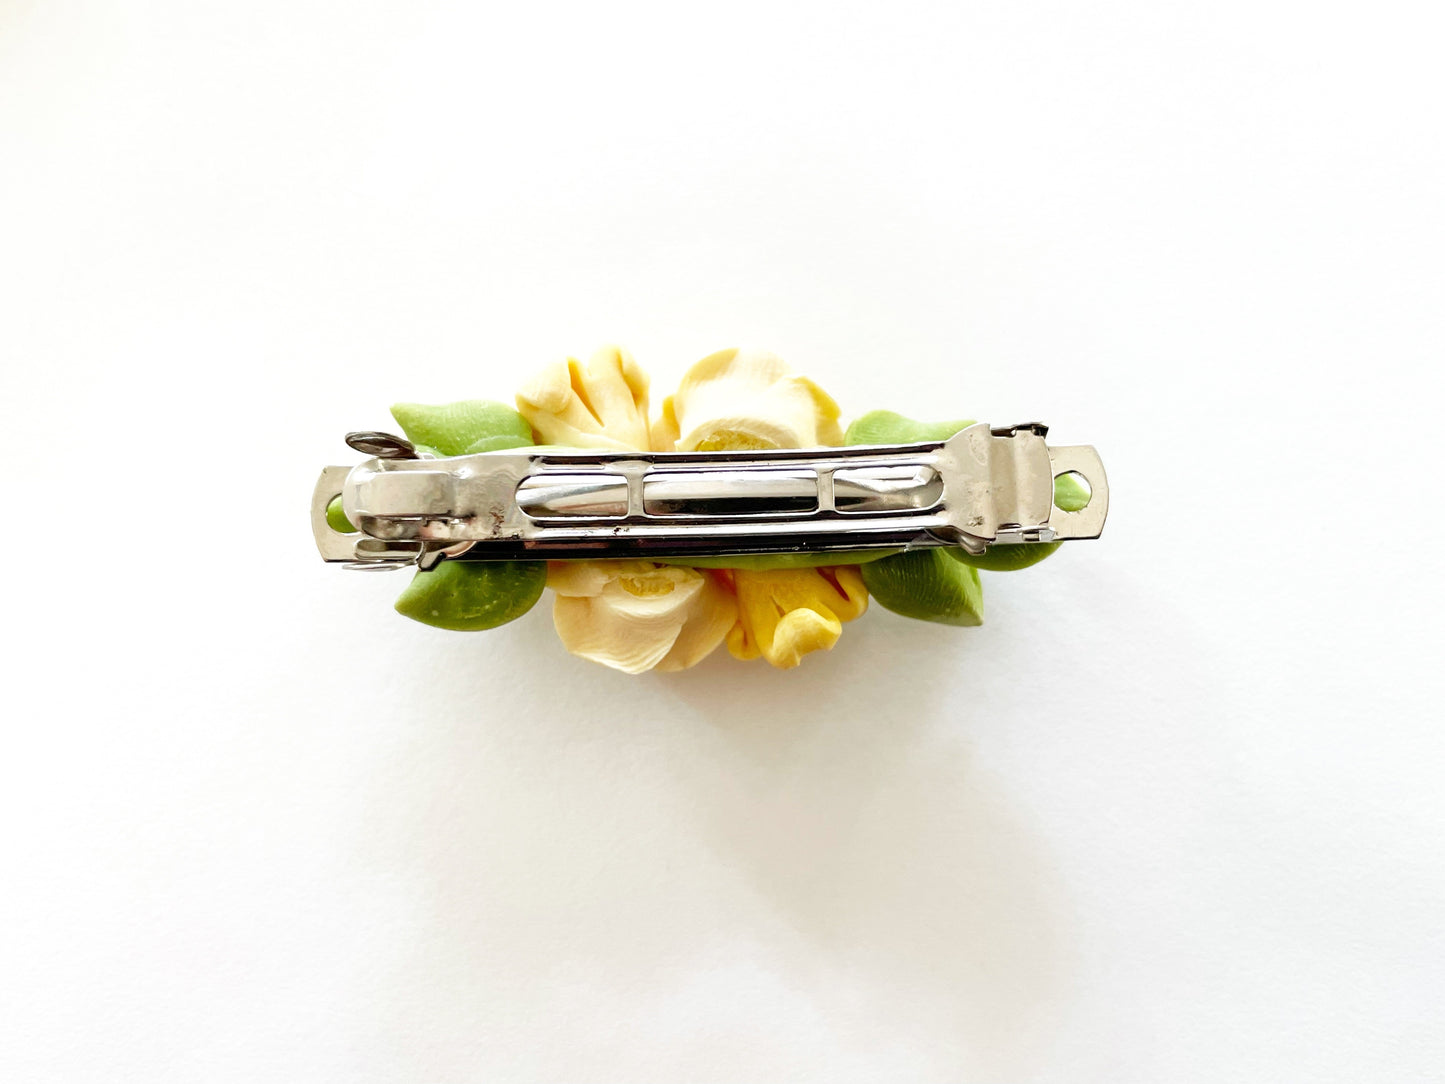 Polymer Clay Hair Barrette - Yellow Rose & Fillers 手工陶瓷軟土髮夾